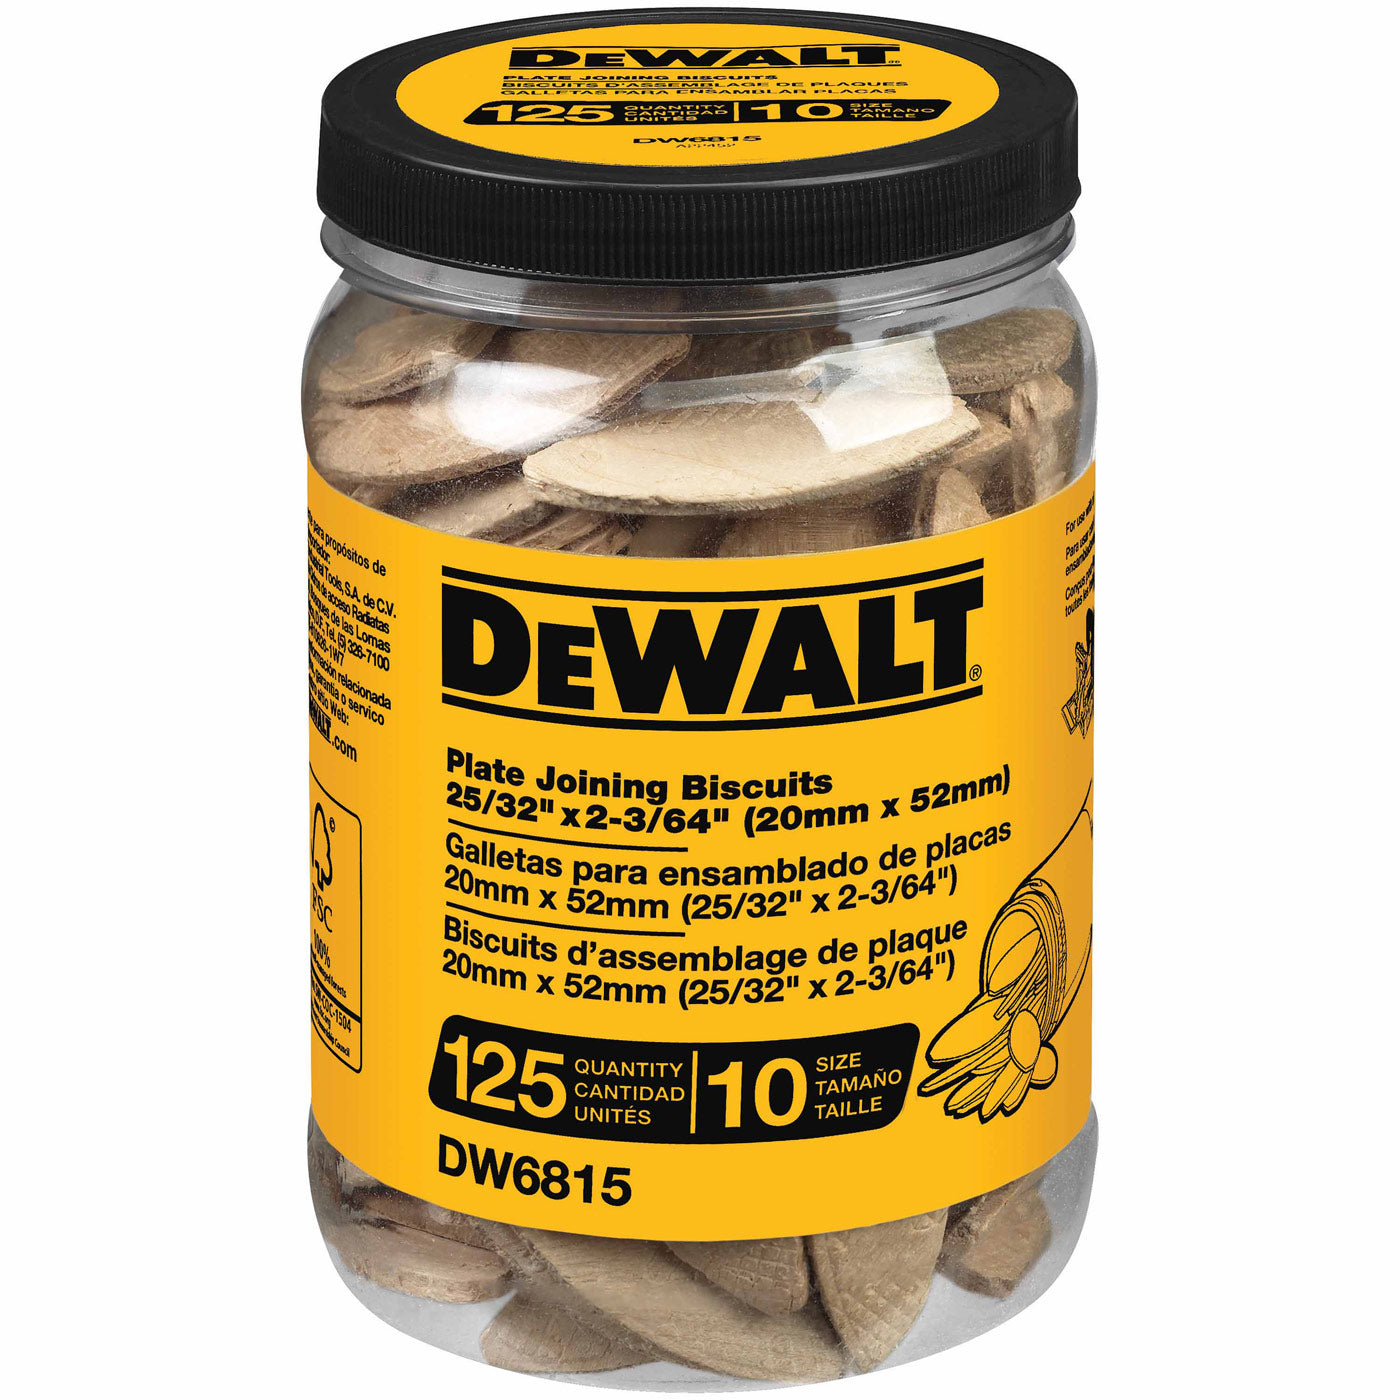 DeWalt DW6815 Size 10 Plate Joining Biscuits (125 Count)